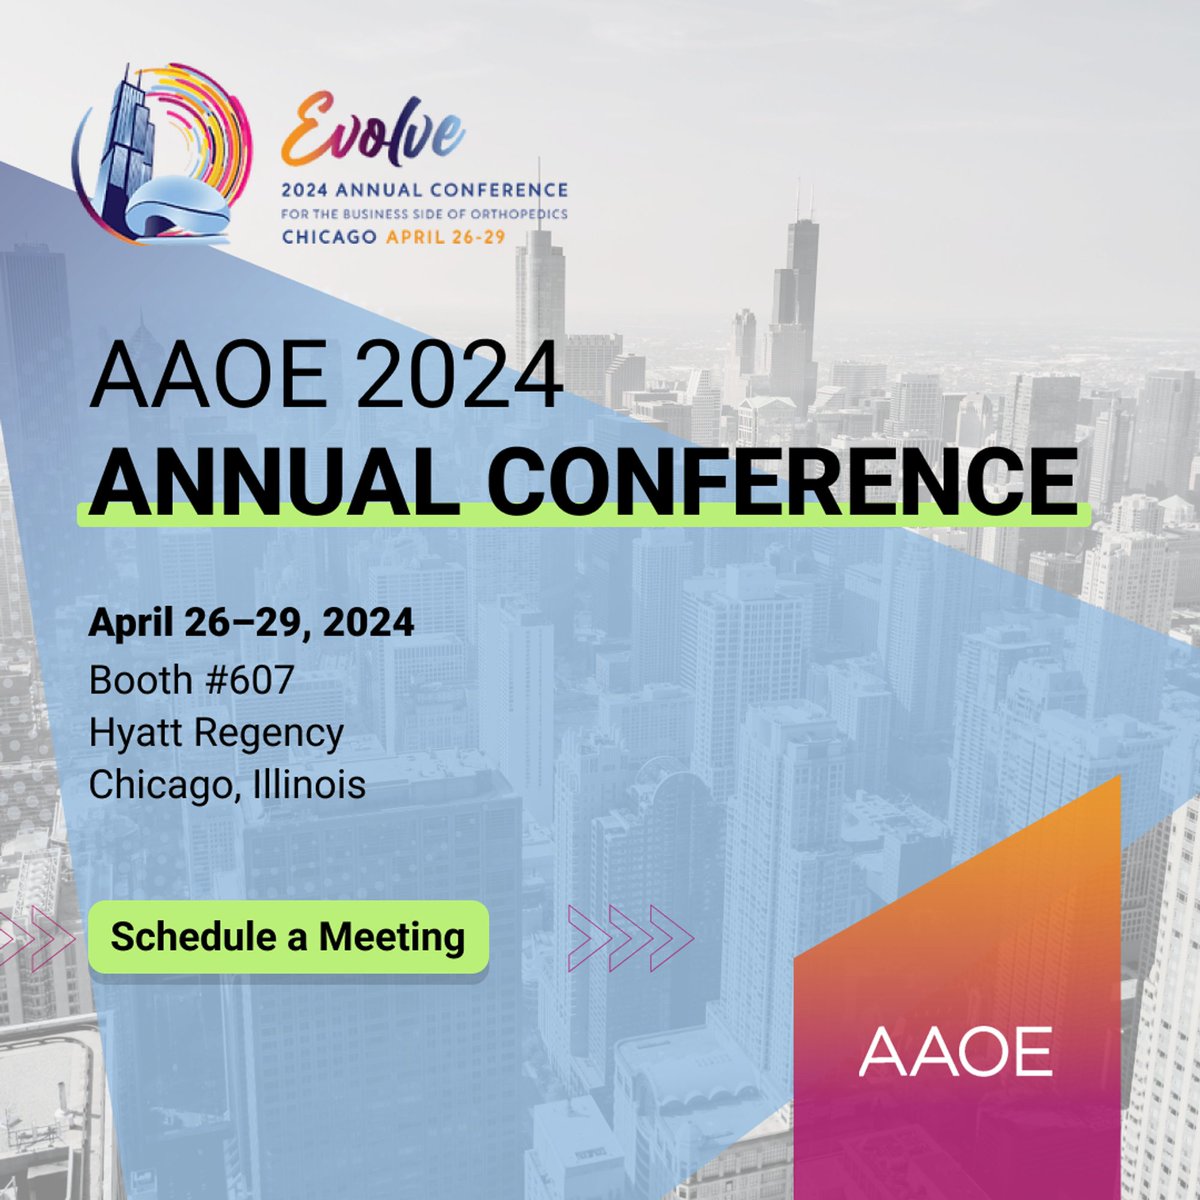 Are you going to the AAOE Conference in Chicago? David Byrd, Nathan Skorick, and team will be in booth #607 offering comprehensive RCM assessments. hubs.li/Q02tcmKR0  #AAOEConference2024 #AAOE #Orthopedics #OrthopedicSurgeons #OrthopedicRCM